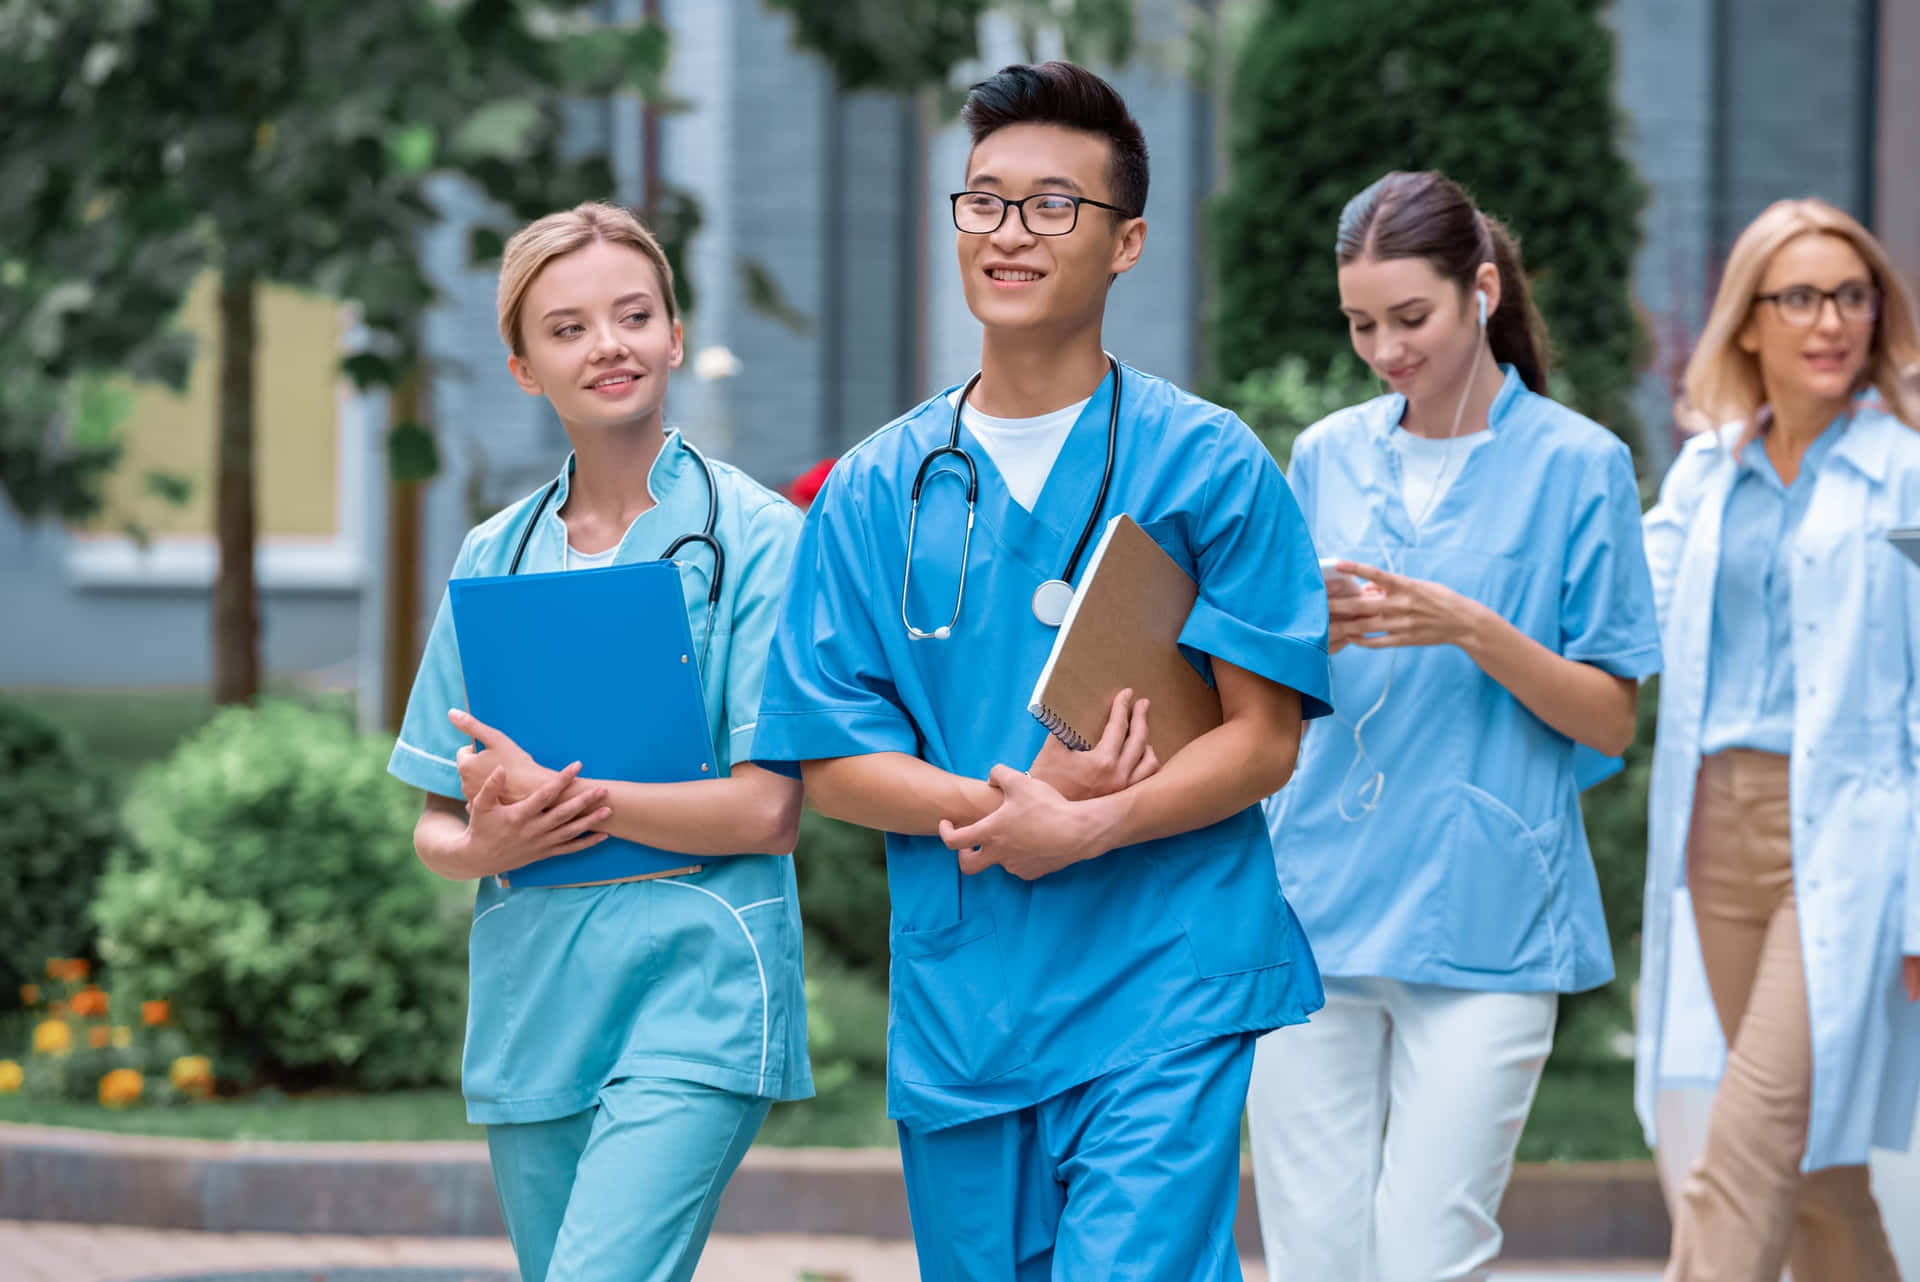 A Group Of Nurses Walking Down The Street